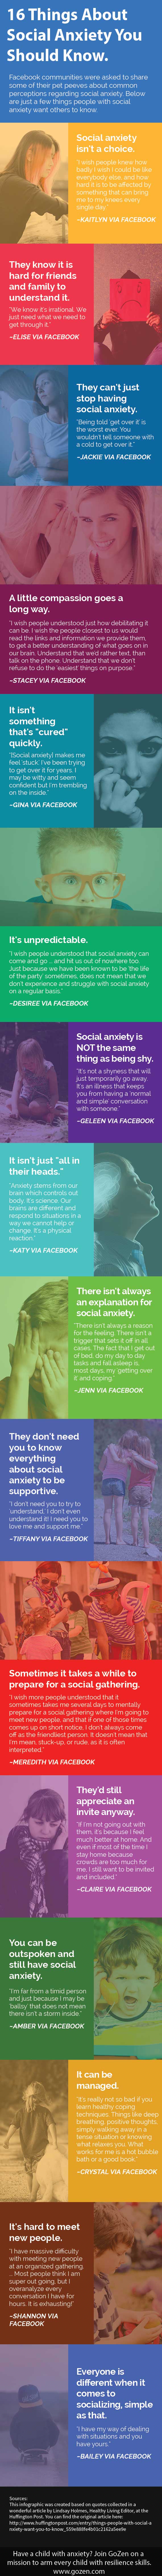 Social Anxiety Tips and Tools